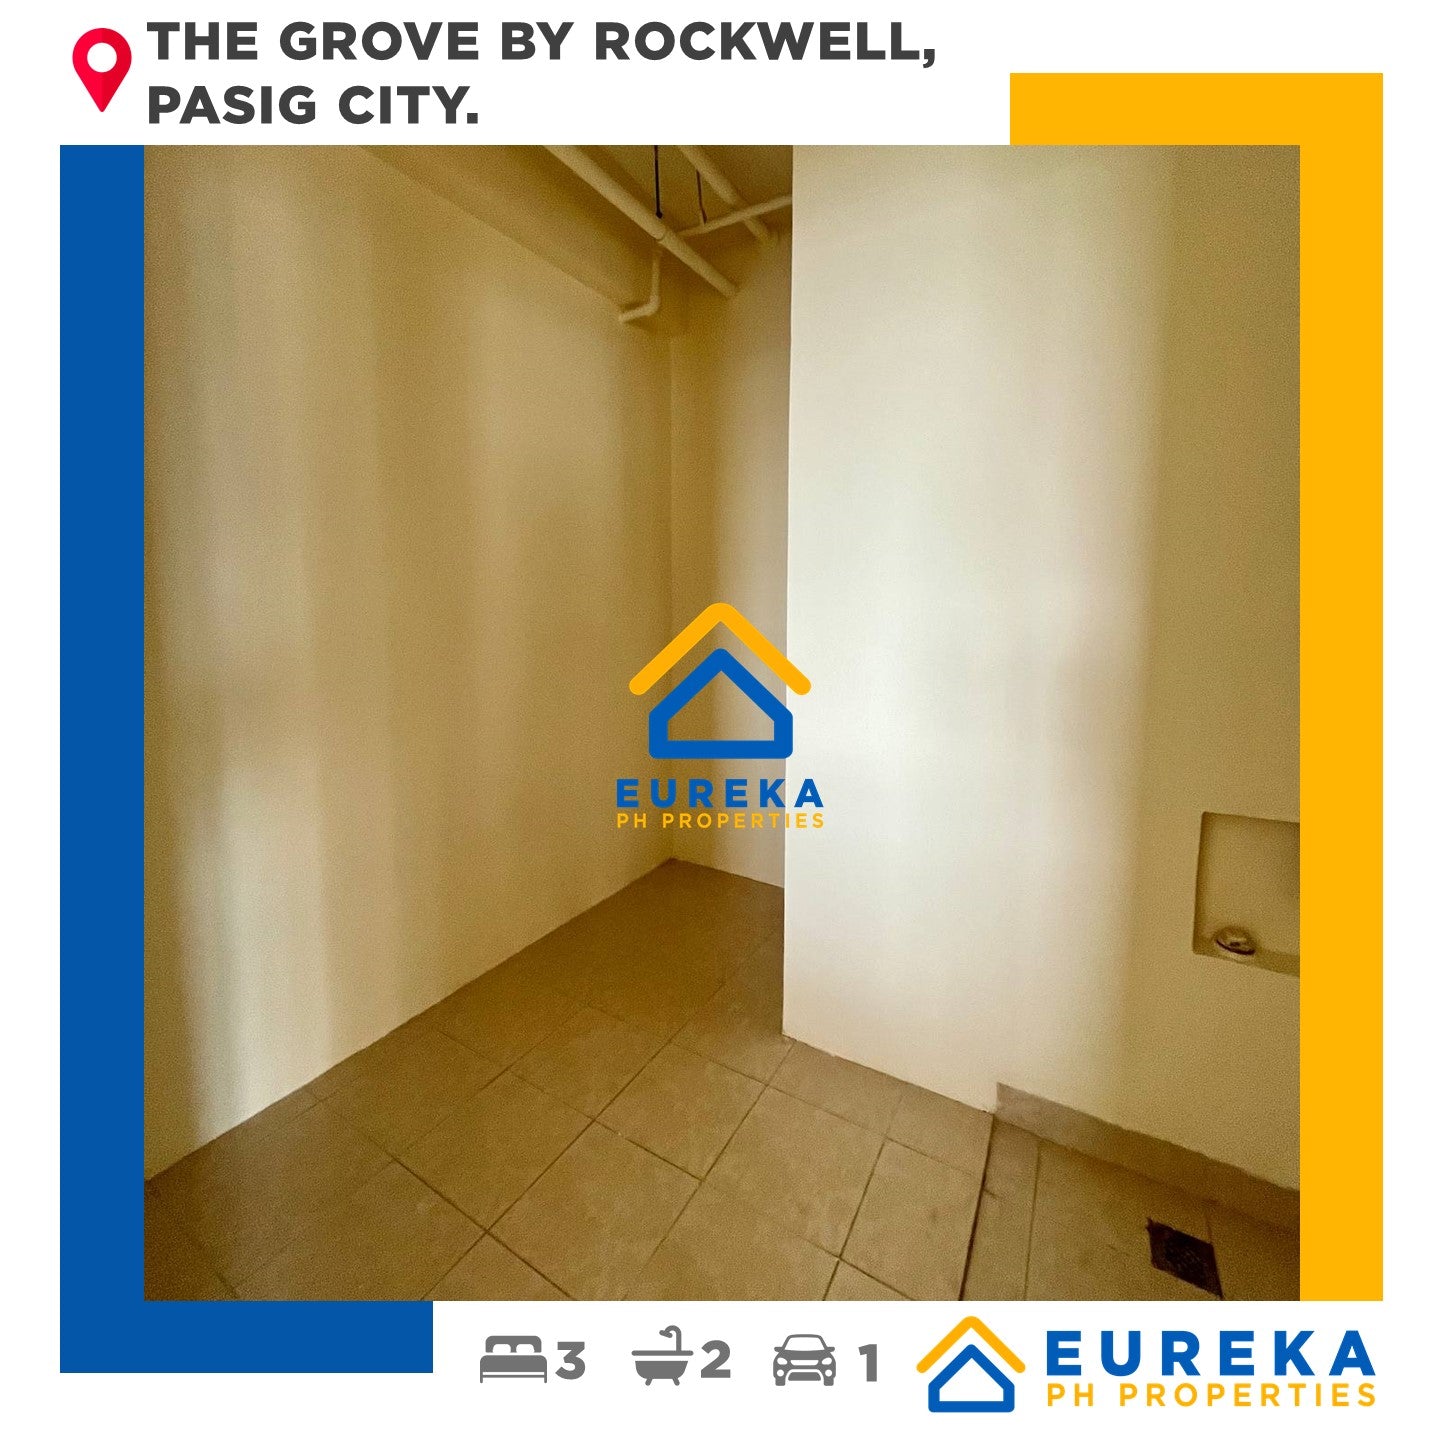 97 sqm 2BR w/ maids room and 1 parking at Grove by Rockwell, Pasig City.